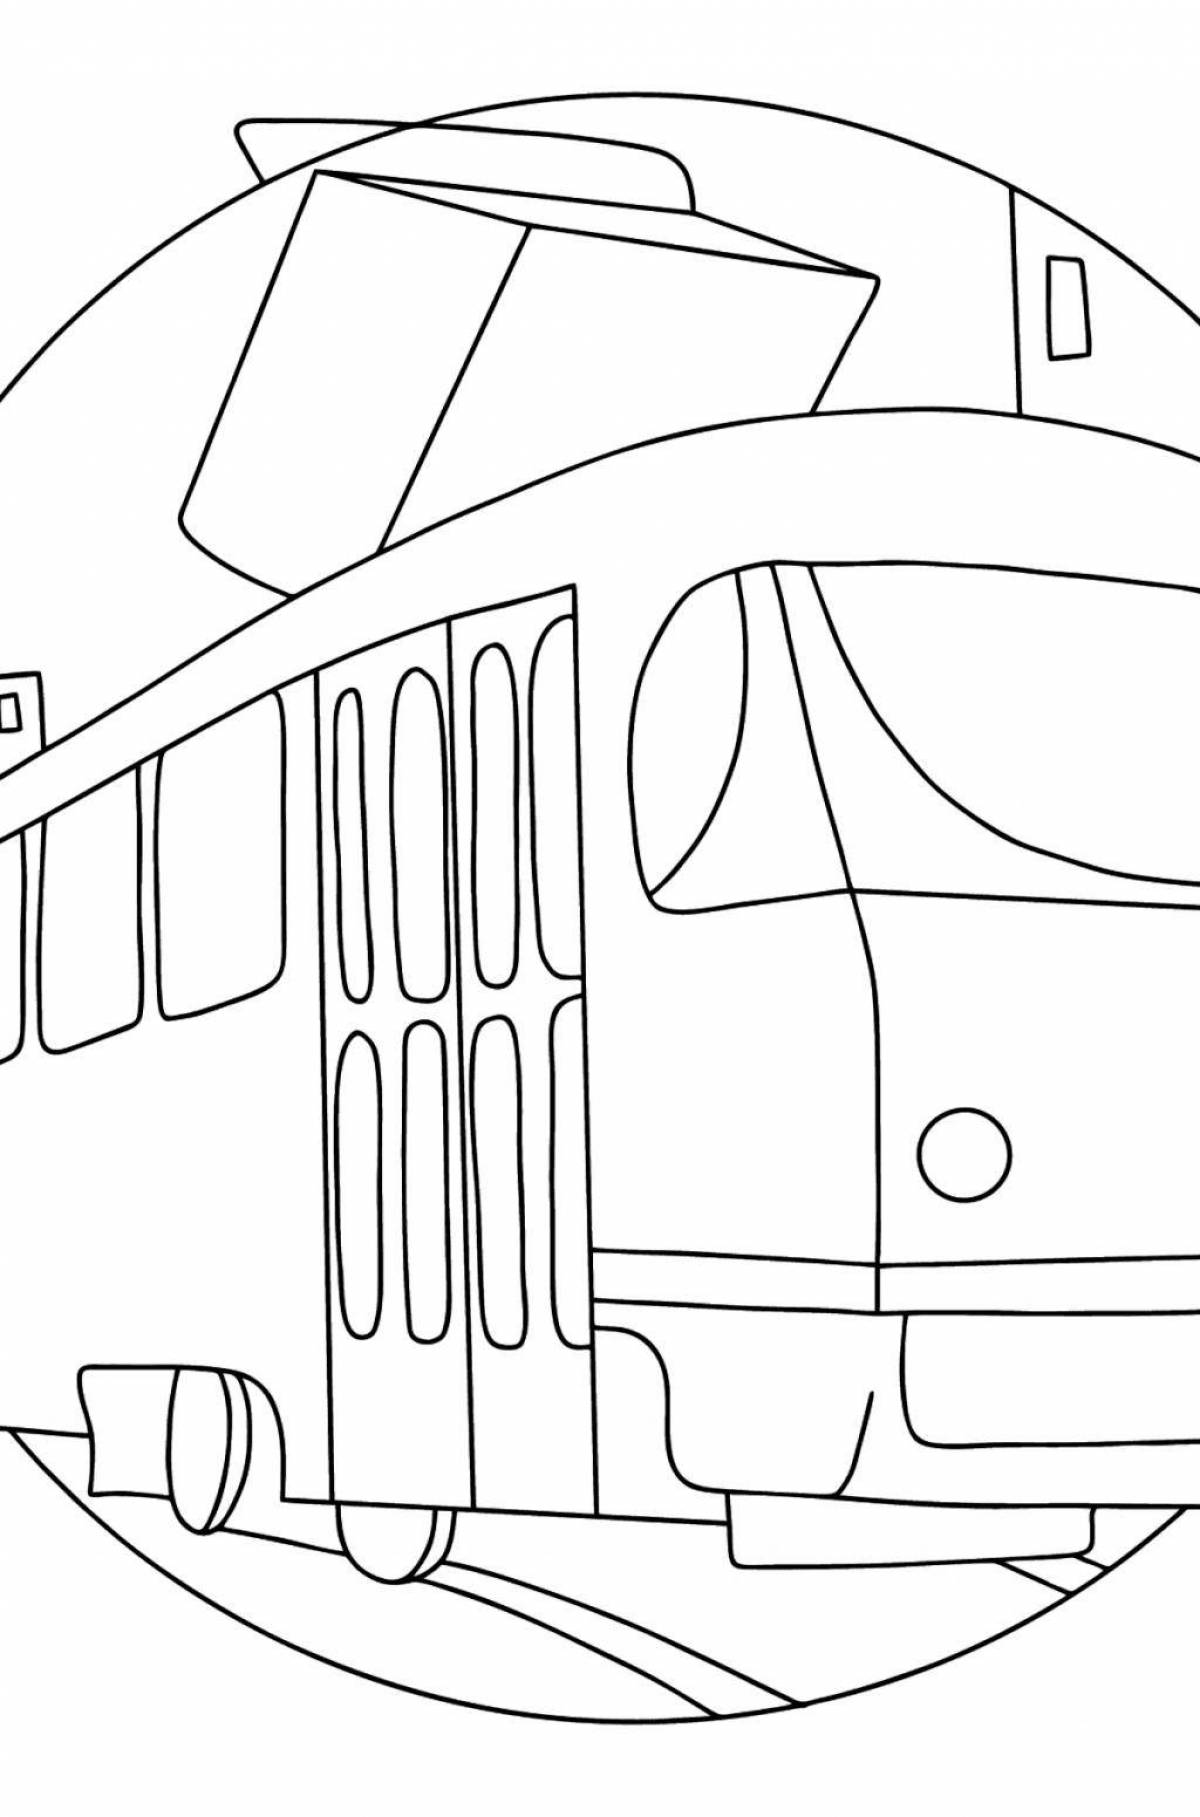 Pre-k tram inspiration coloring page